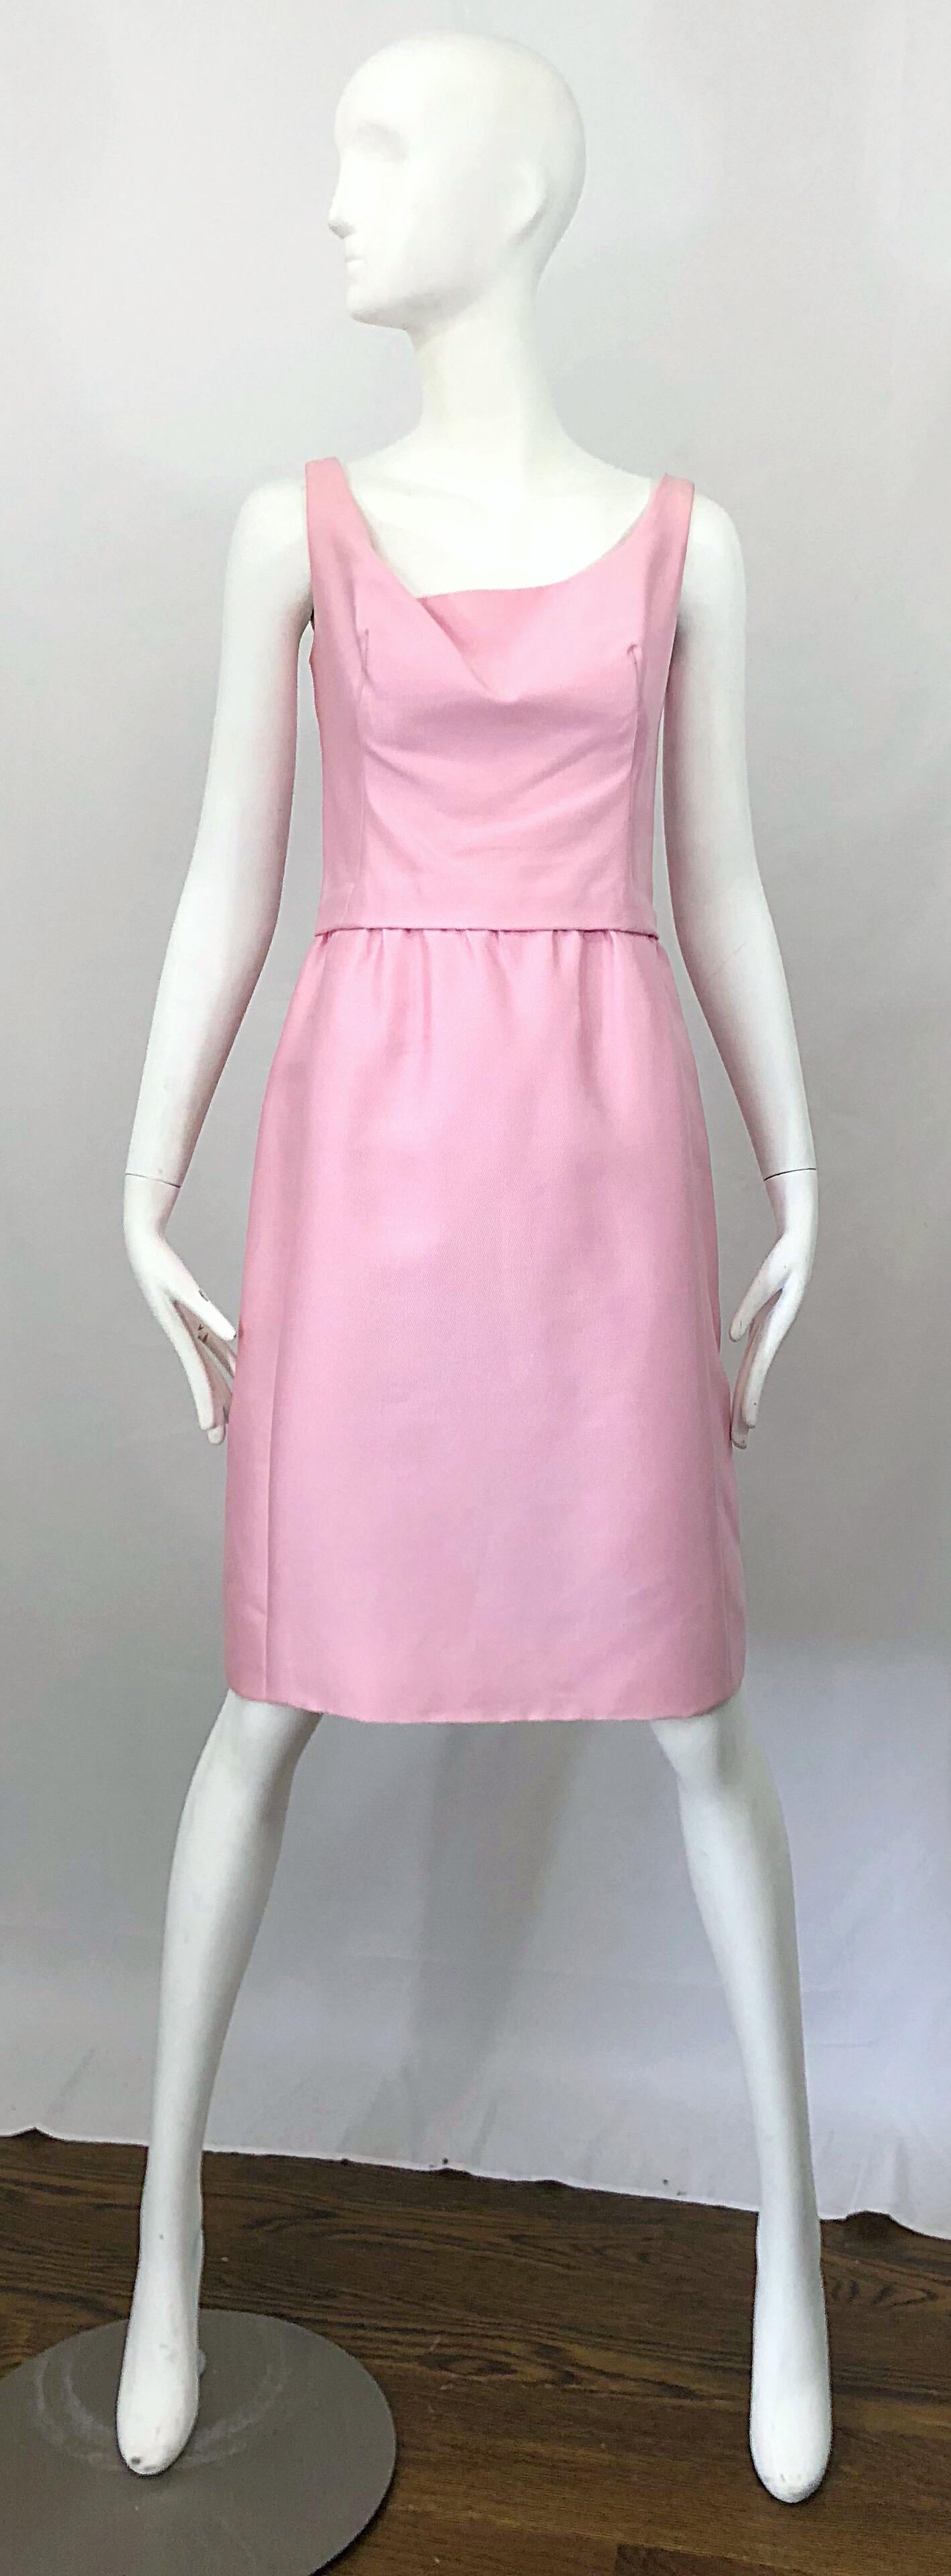 Chic 1960s PAT SANDLER light pink silk shift dress and jacket ensemble!!! Dress is sleeveless with a draped tailored bodice and forgiving fuller skirt. Full metal zipper up the back with hook-and-eye closure. Pillbox jacket has a bow at center waist